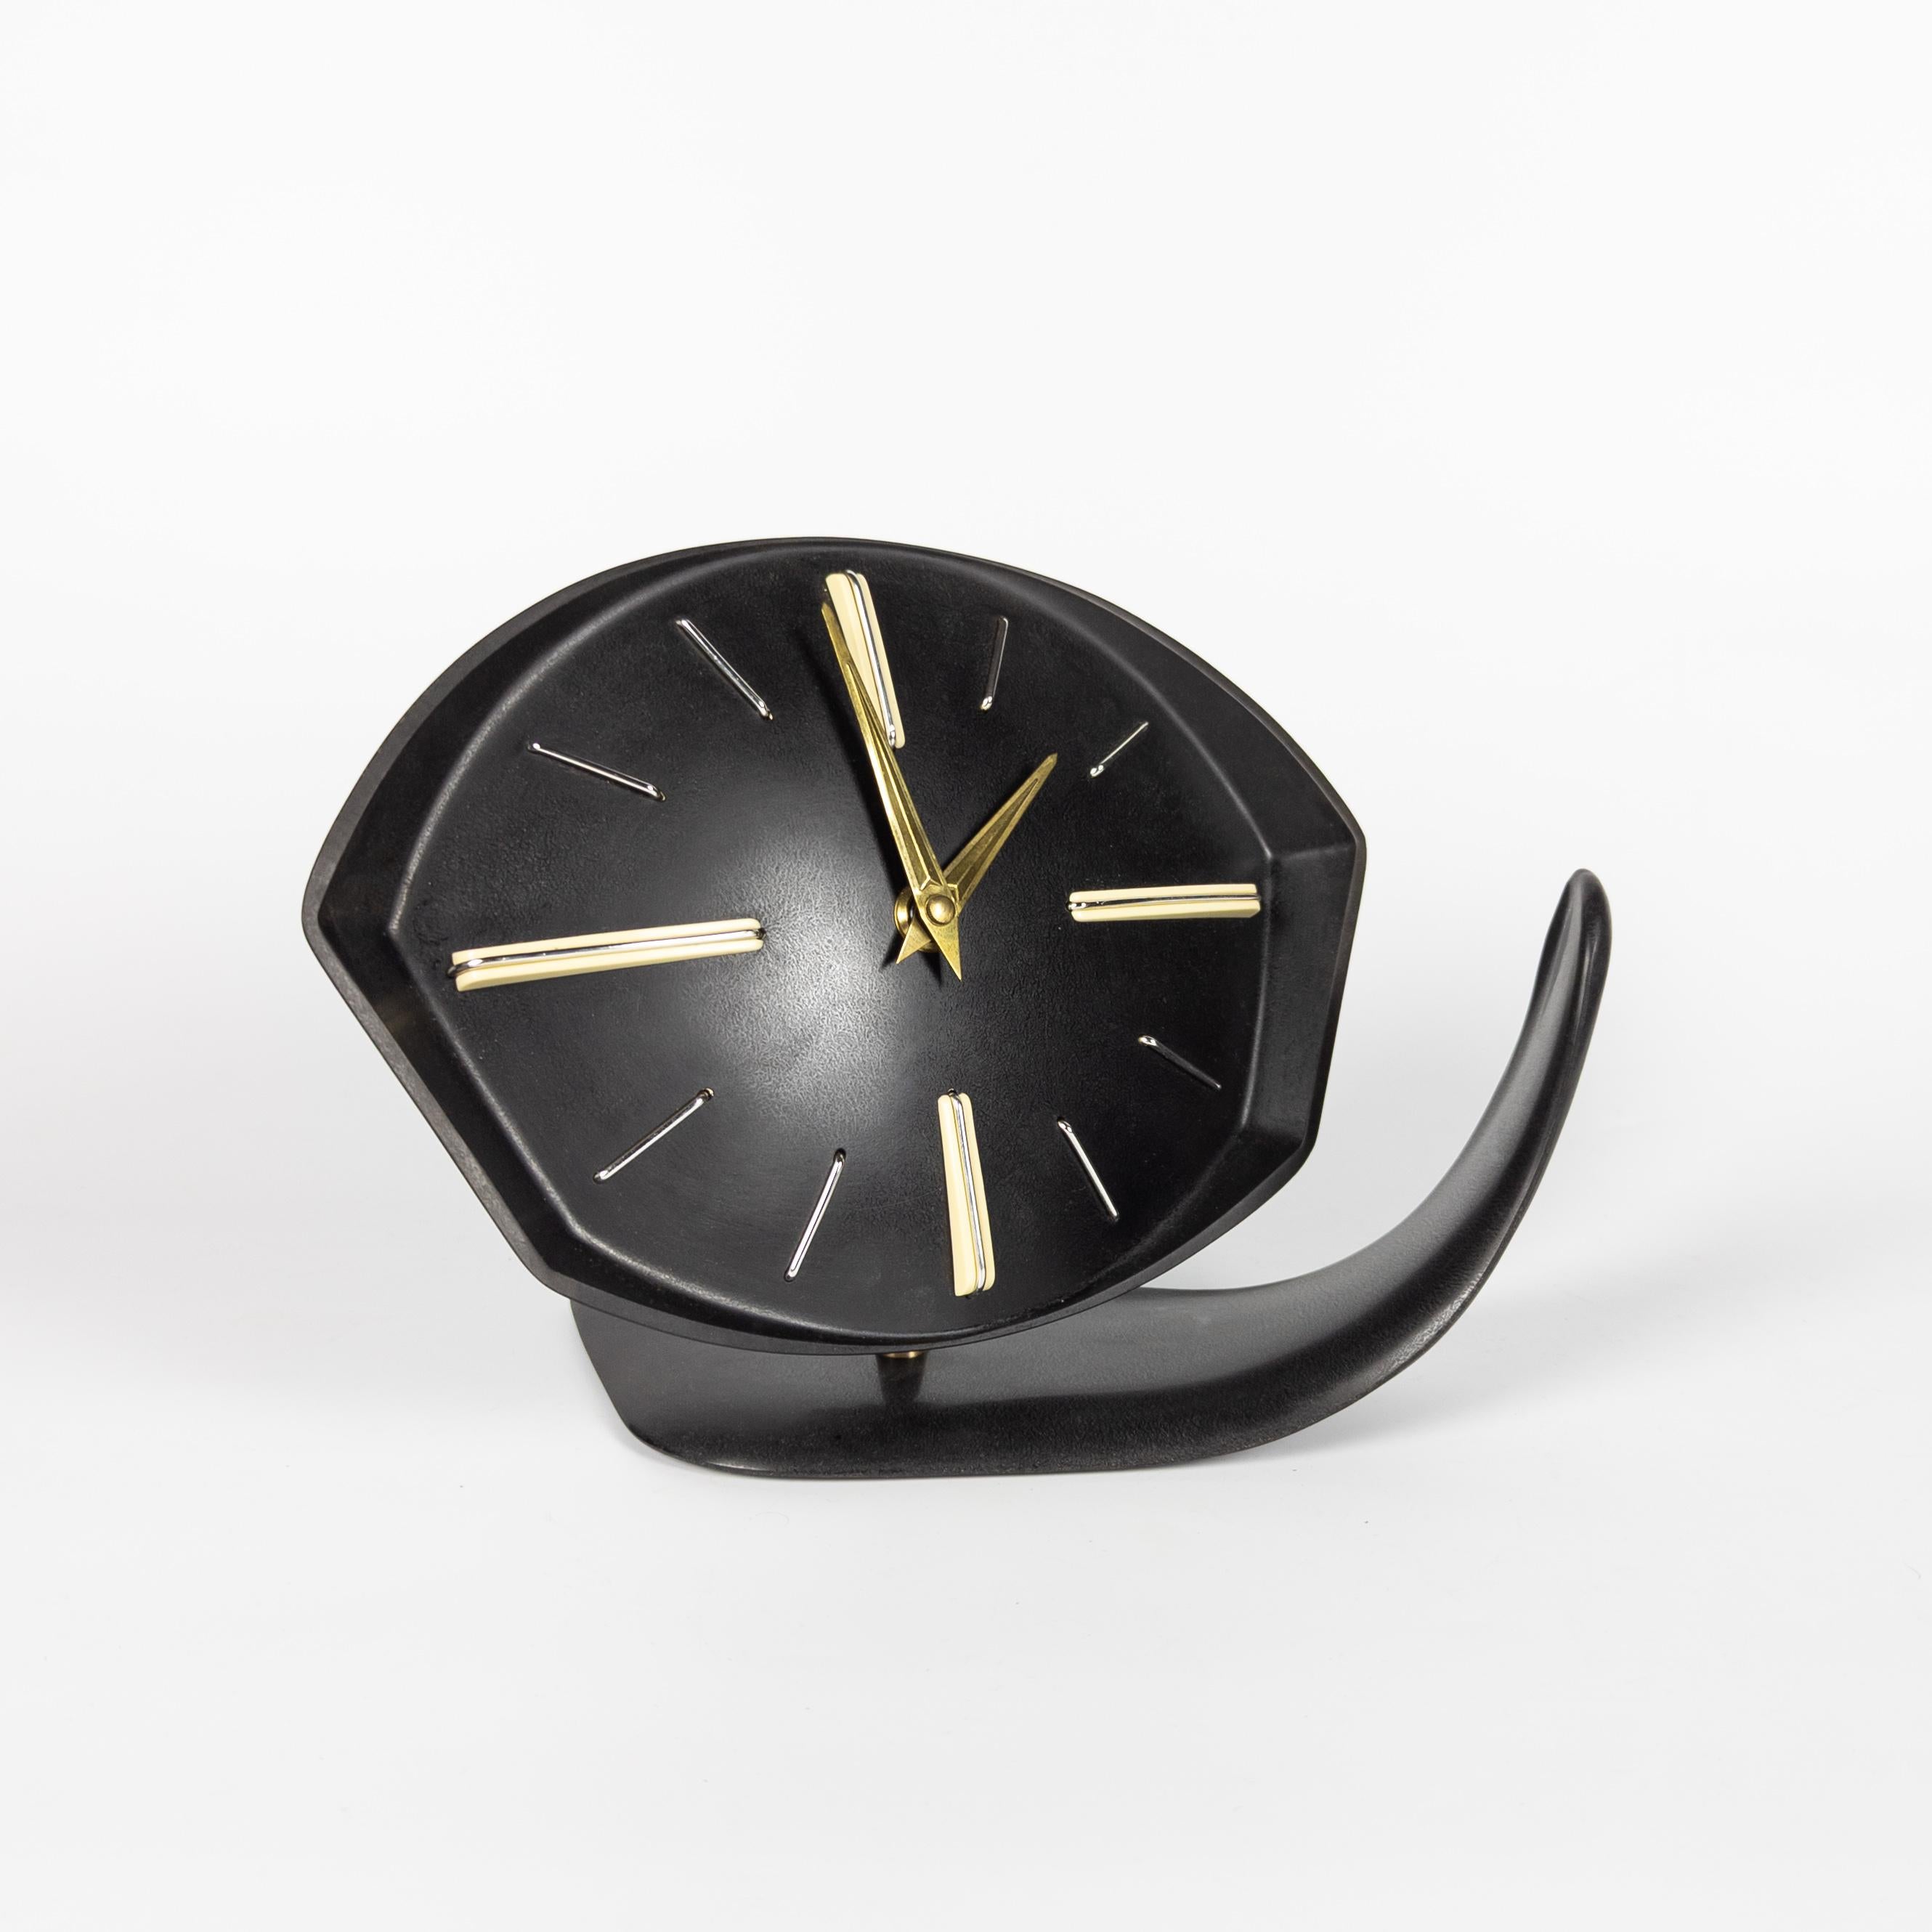 Extremely rare clock from Czech manufacturer PRIM. Manufactured in former Czechoslovakia in 1950's. Black bakelite body with brass hands. The clock is hinged and can be placed in several positions. It can be placed on the table or hanged on the